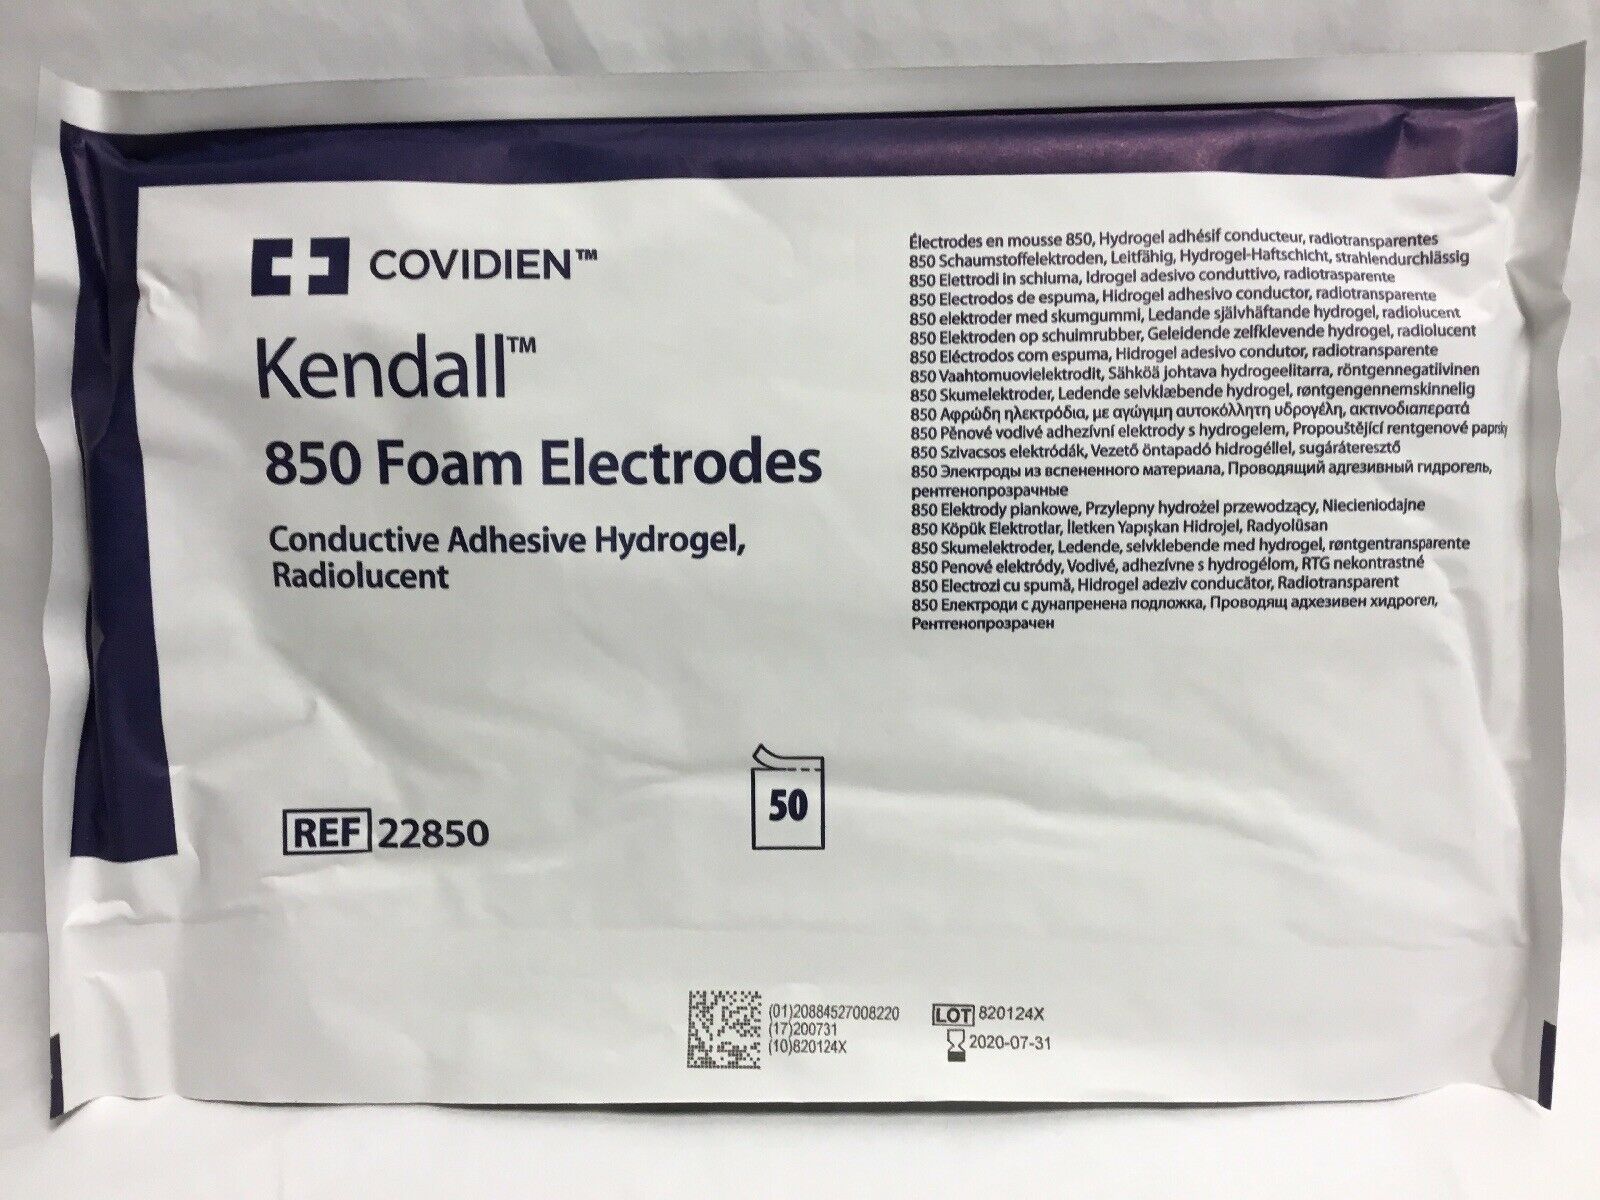 Covidien Kendall 850 Foam Electrodes, 22850, 1 Pack of 50 (29KMD) DIAGNOSTIC ULTRASOUND MACHINES FOR SALE